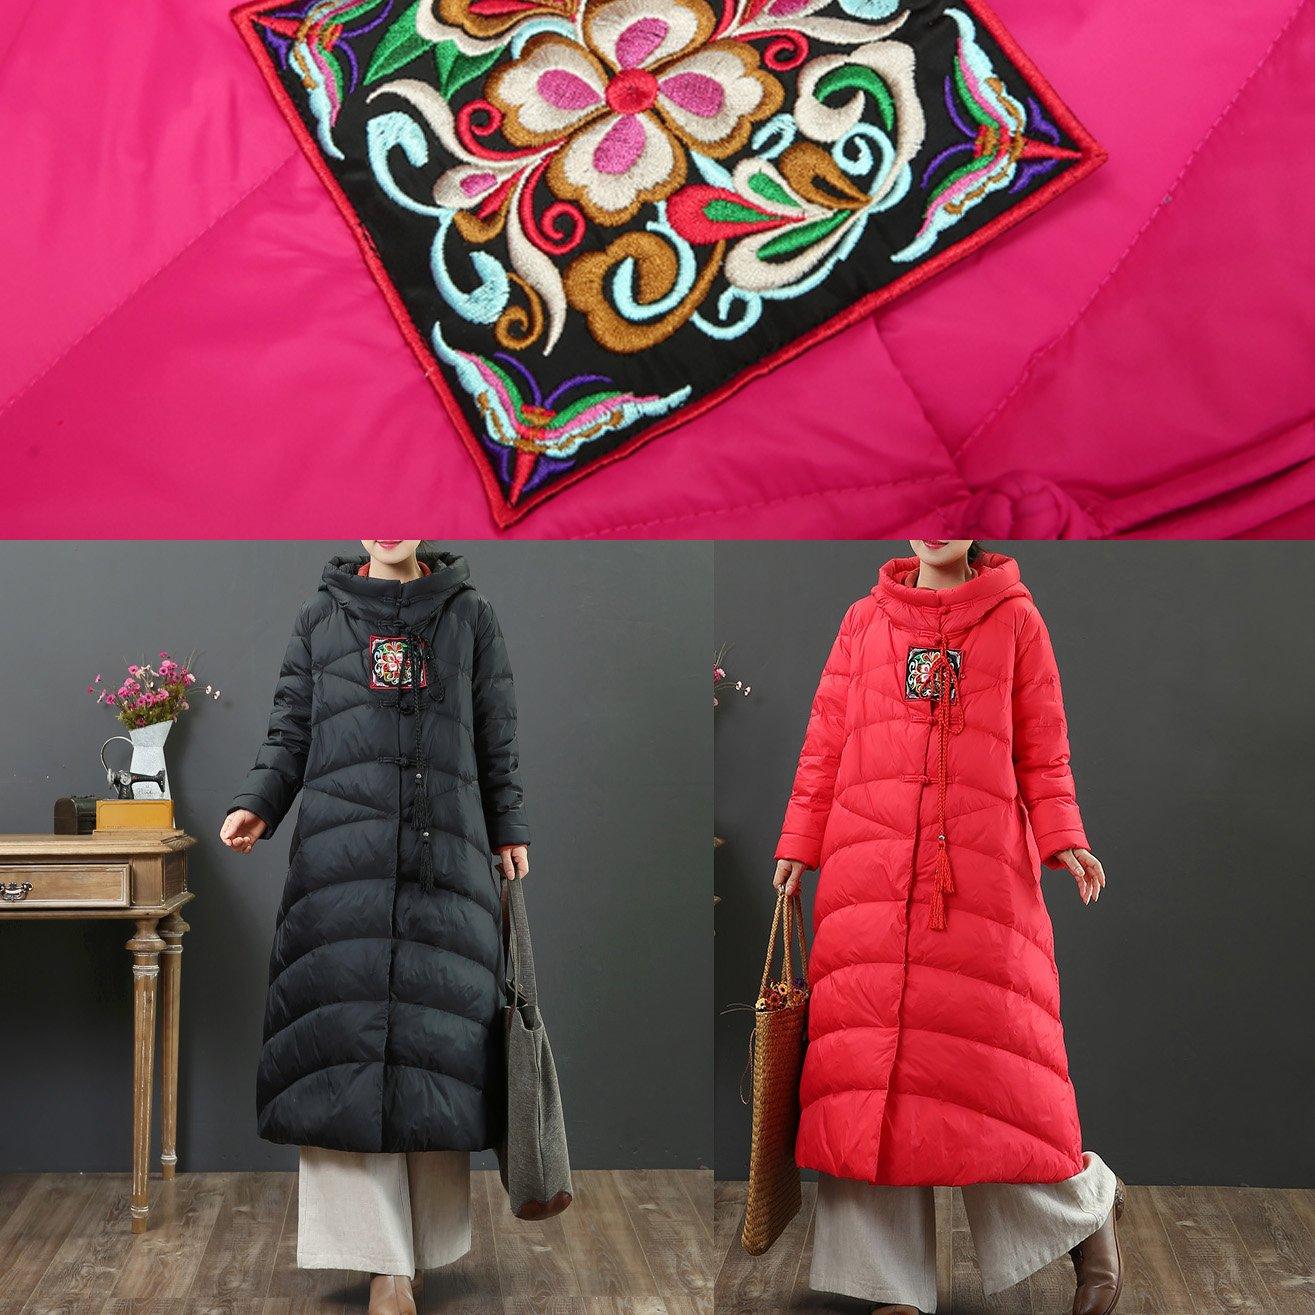 Warm red duck down coat plus size thick down jacket hooded top quality winter outwear - Omychic